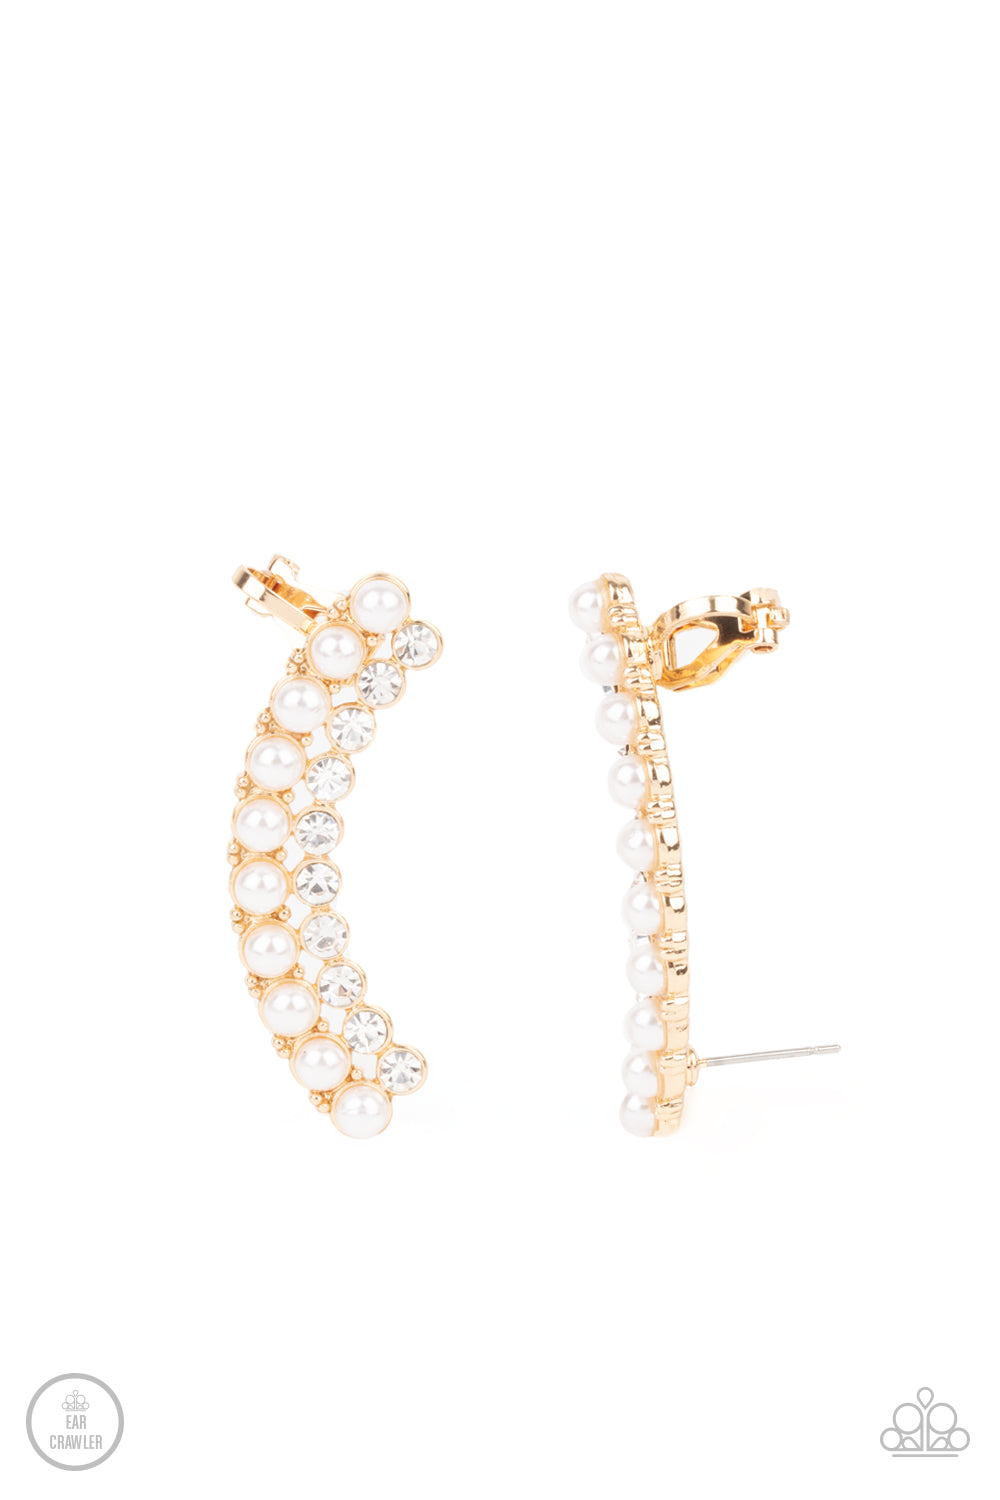 Double Down on Dazzle - Gold Pearls and Rhinestones Ear Crawlers featuring classic gold fittings, two rows of dainty white pearls and glassy white rhinestones arch into a timeless statement piece. Earring attaches to a standard post earring. Features a clip-on fitting at the top for a secure fit.  Sold as one pair of ear crawlers.